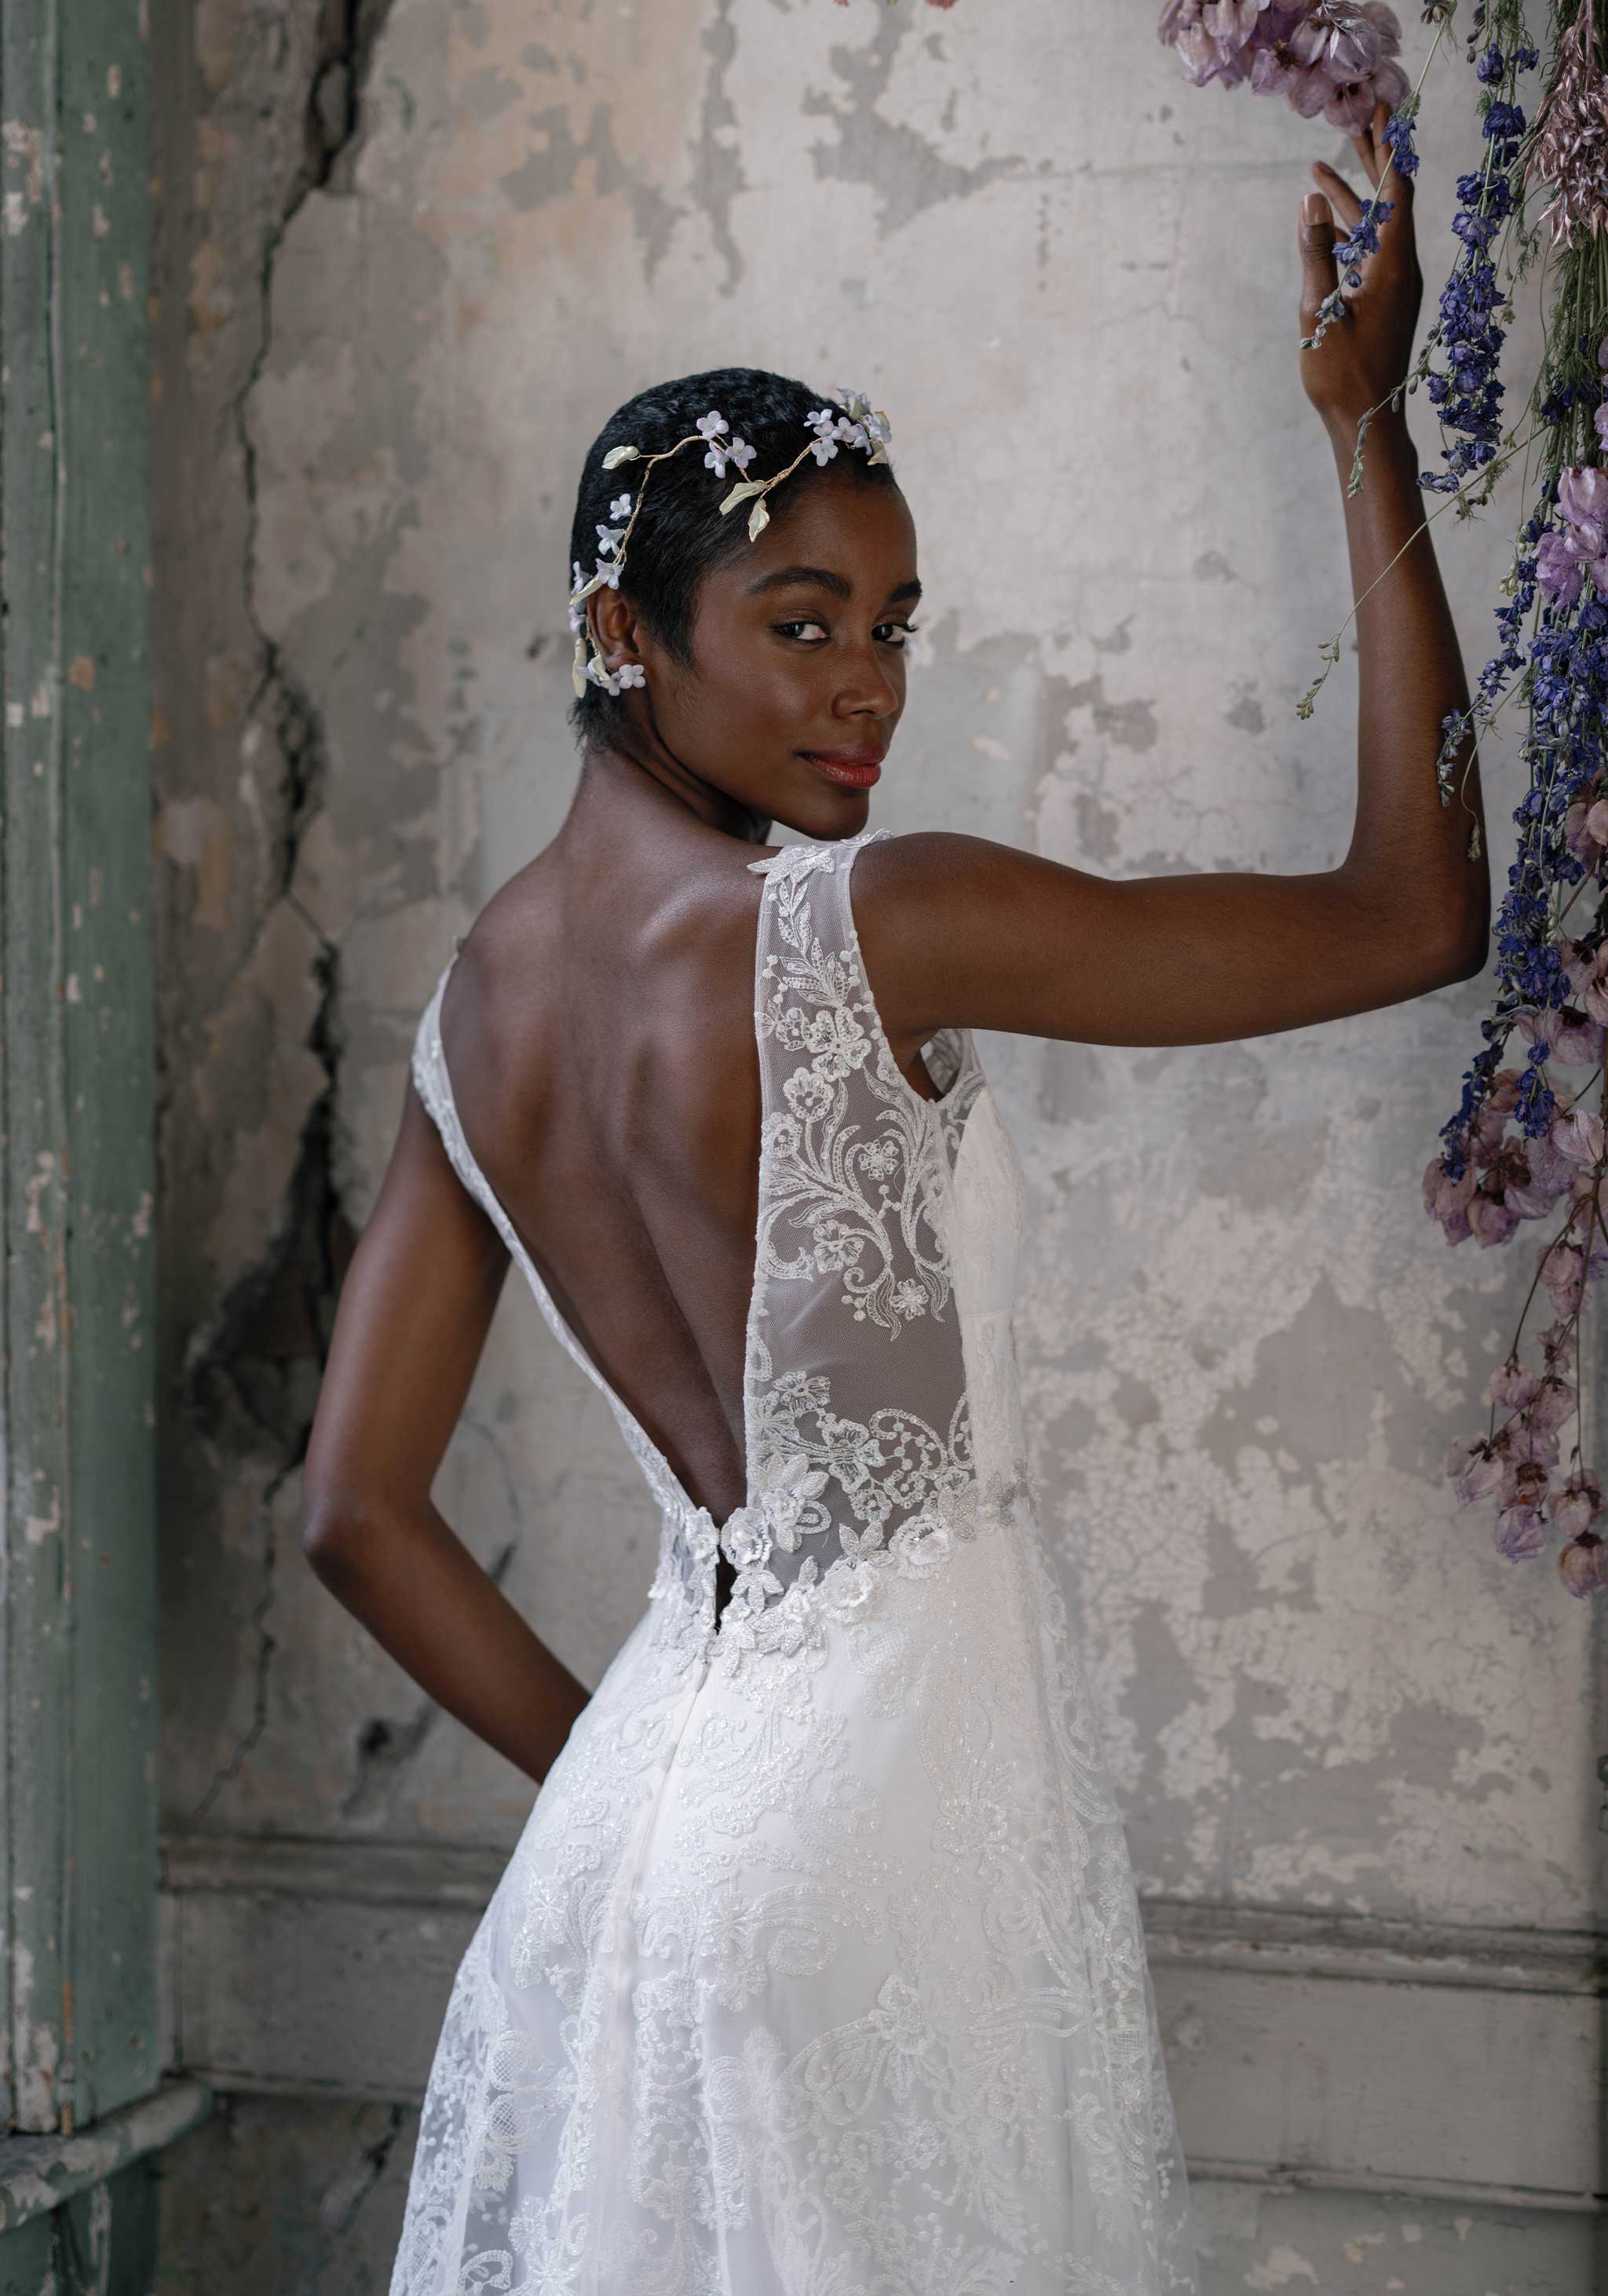 Backless Wedding Dress inspired by Haute Couture Designs